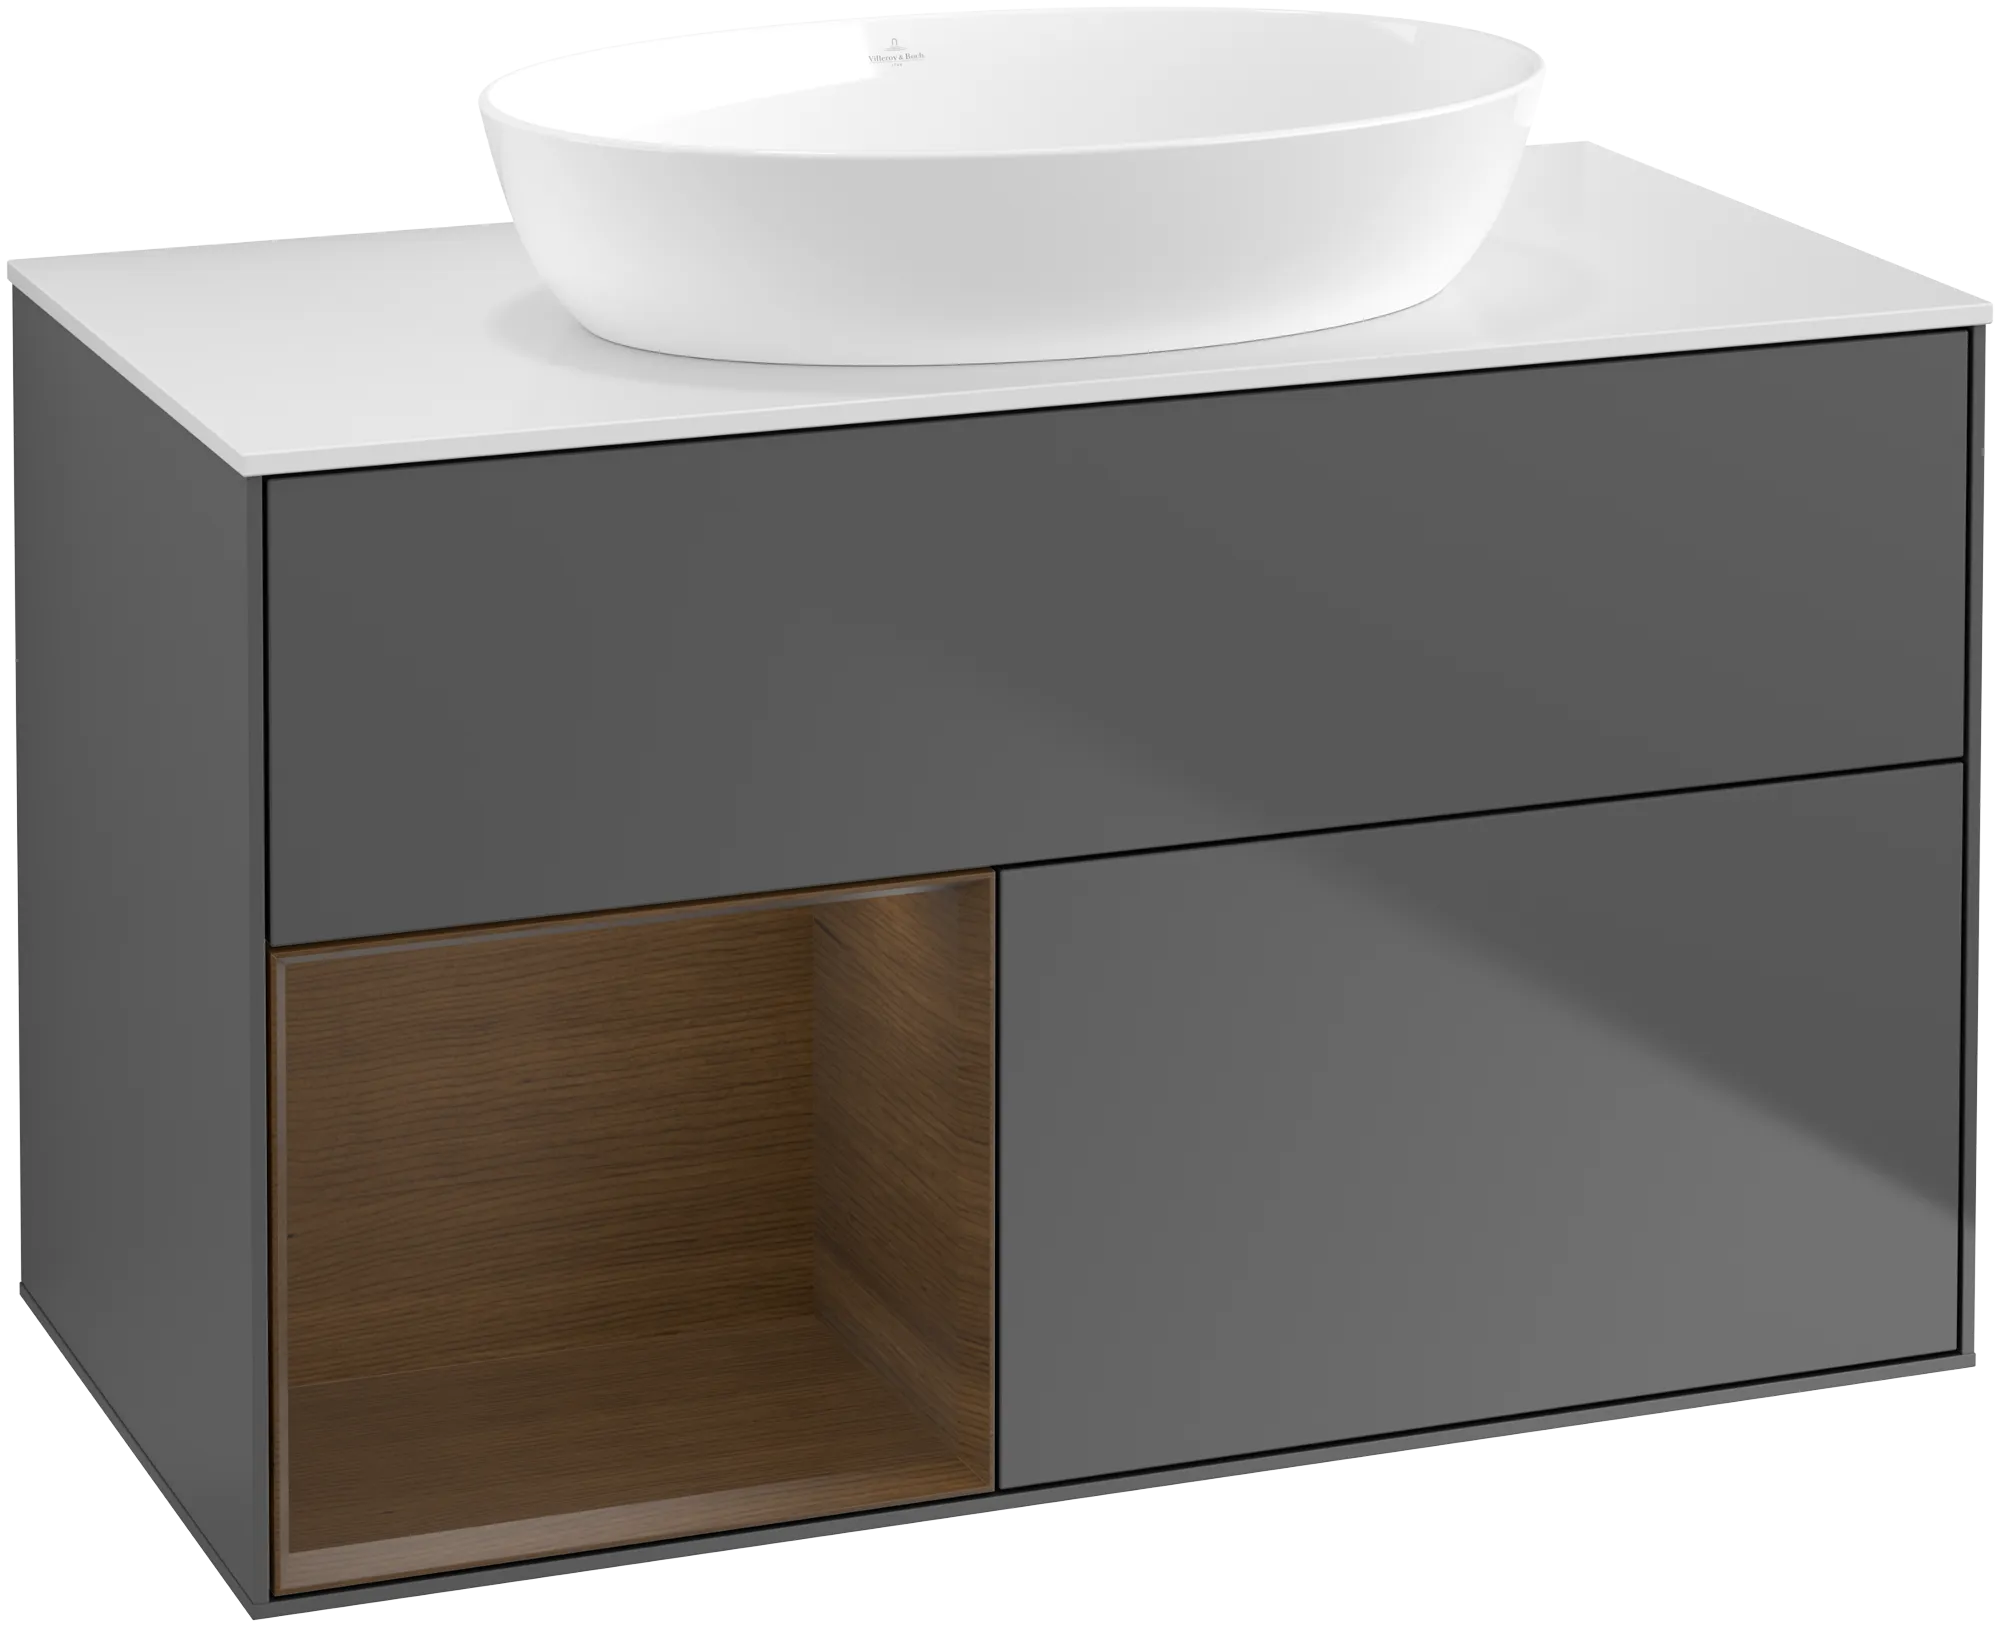 Picture of VILLEROY BOCH Finion Vanity unit, with lighting, 2 pull-out compartments, 1000 x 603 x 501 mm, Anthracite Matt Lacquer / Walnut Veneer / Glass White Matt #GA11GNGK